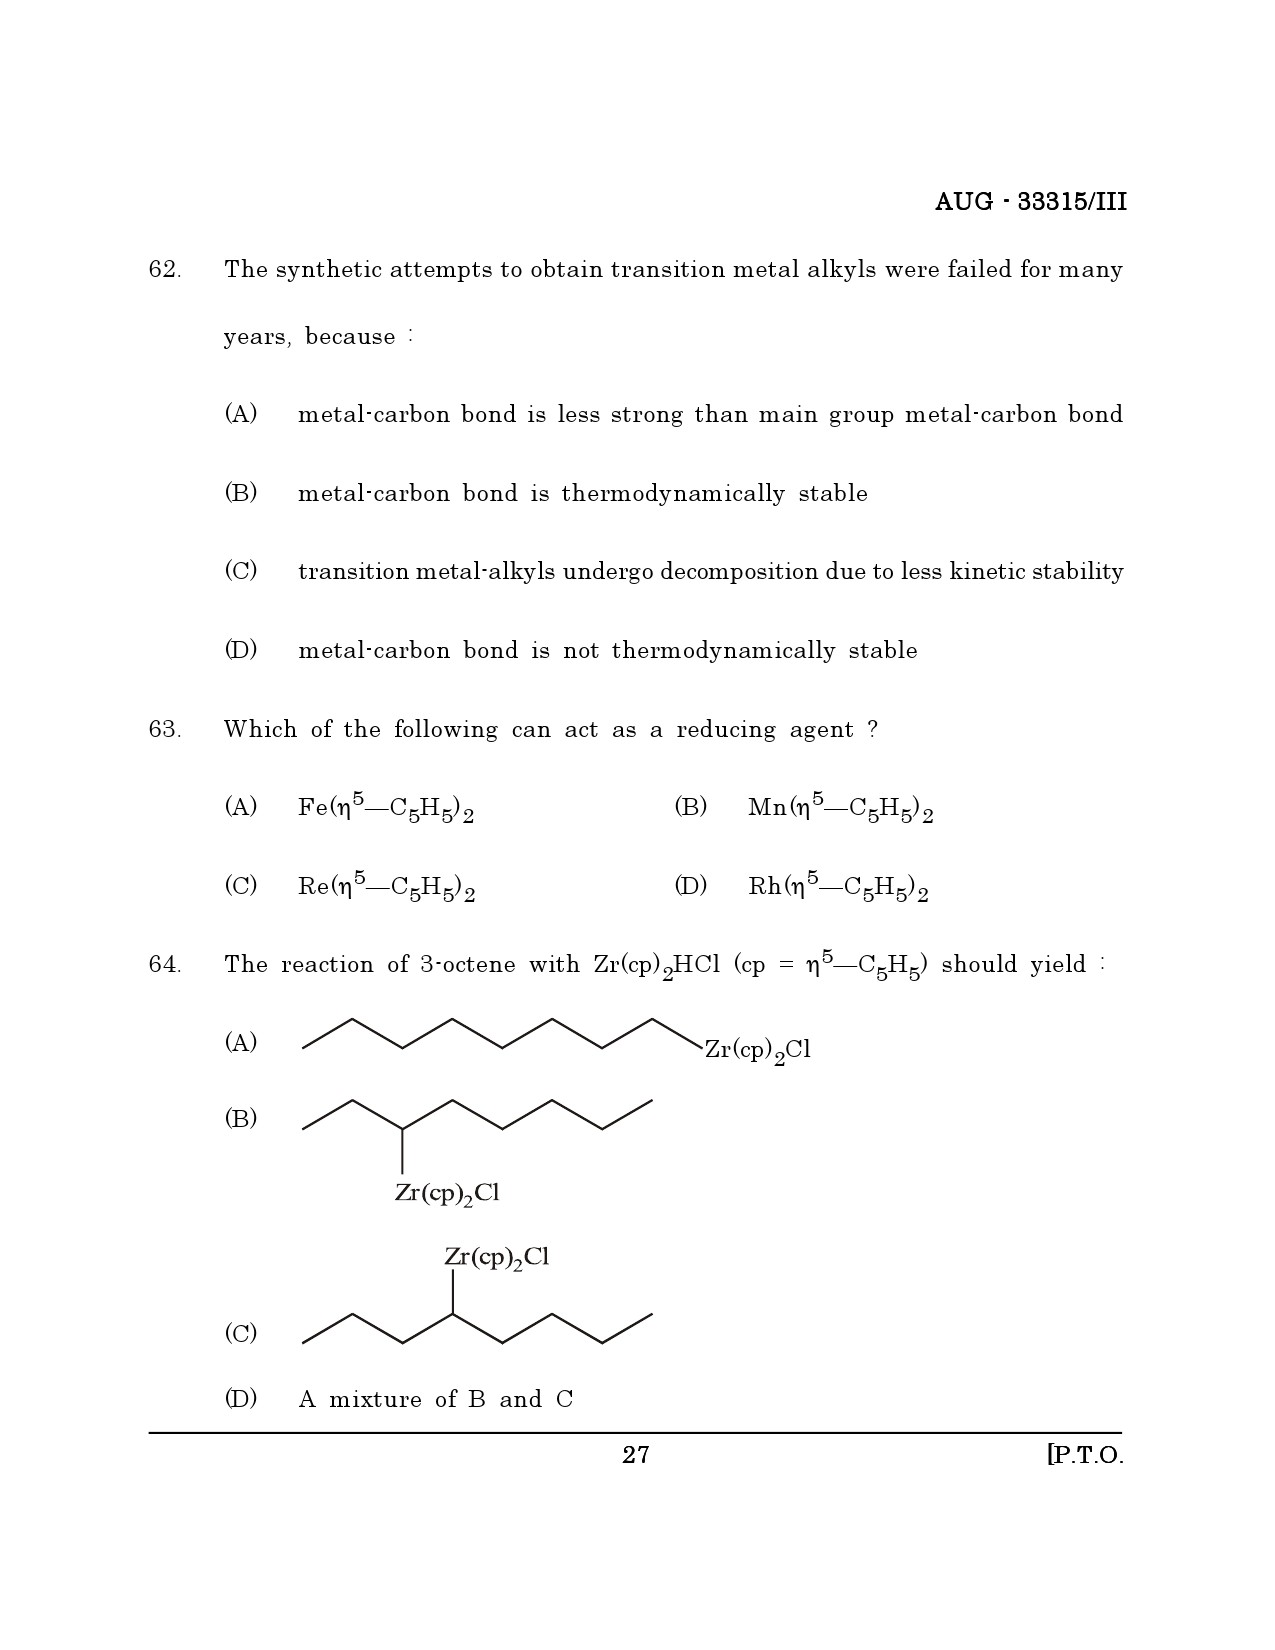 Maharashtra SET Chemical Sciences Question Paper III August 2015 26